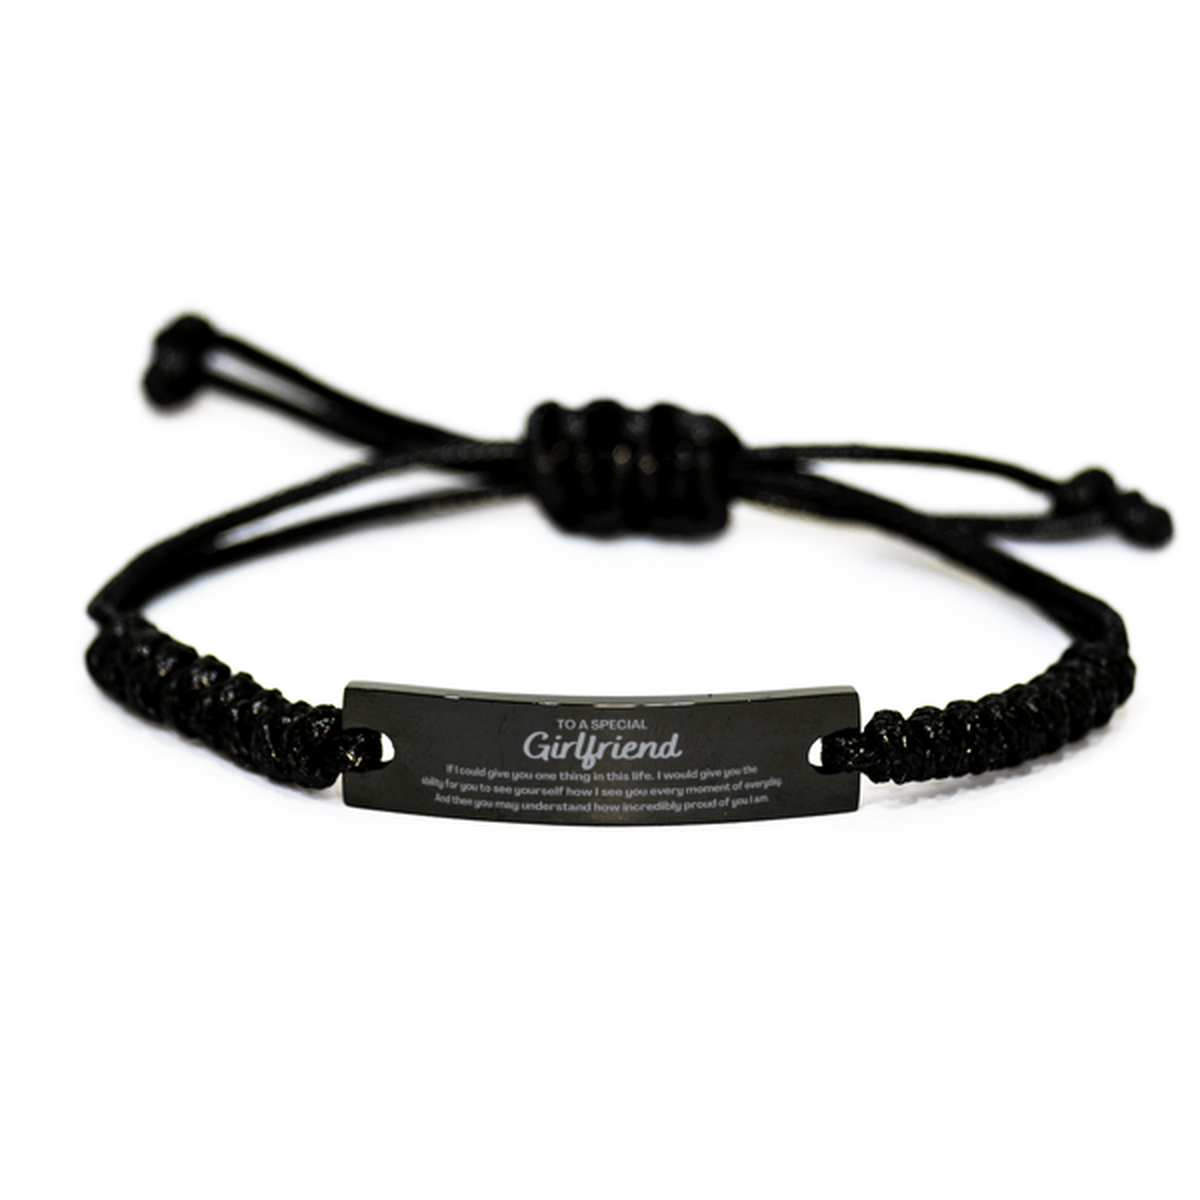 To My Girlfriend Black Rope Bracelet, Gifts For Girlfriend Engraved, Inspirational Gifts for Christmas Birthday, Epic Gifts for Girlfriend To A Special Girlfriend how incredibly proud of you I am